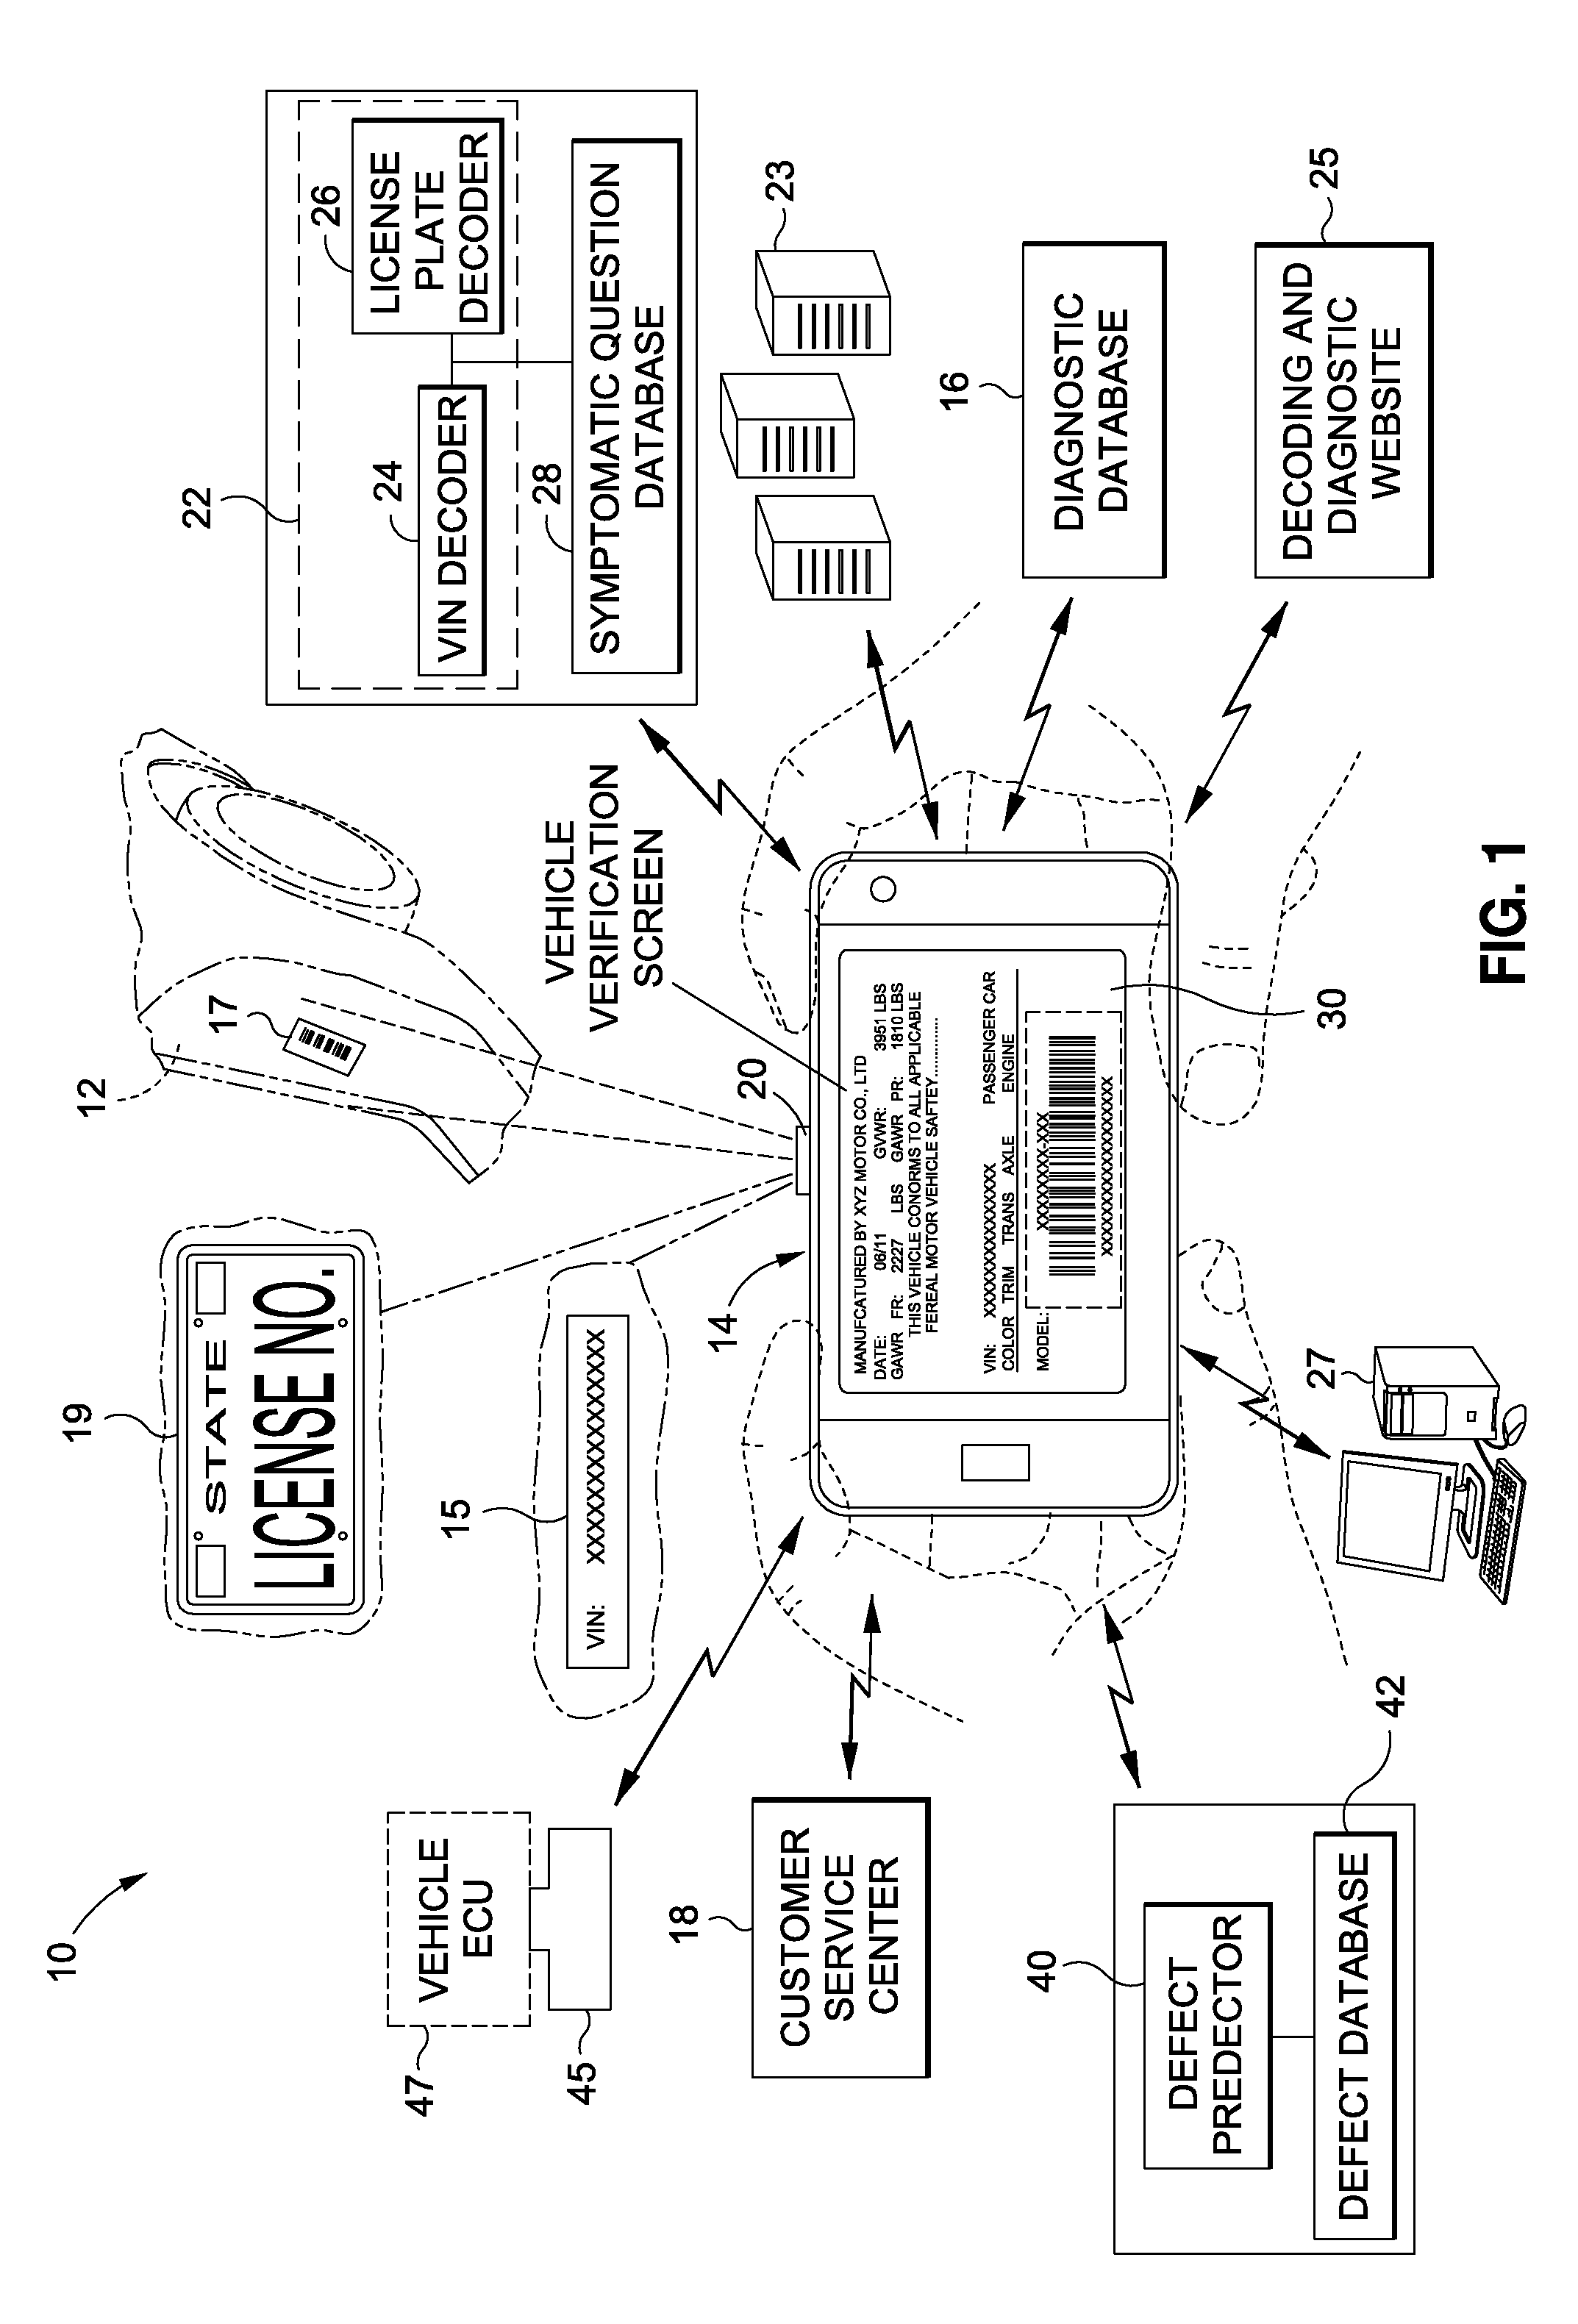 Multi-stage diagnostic system and method